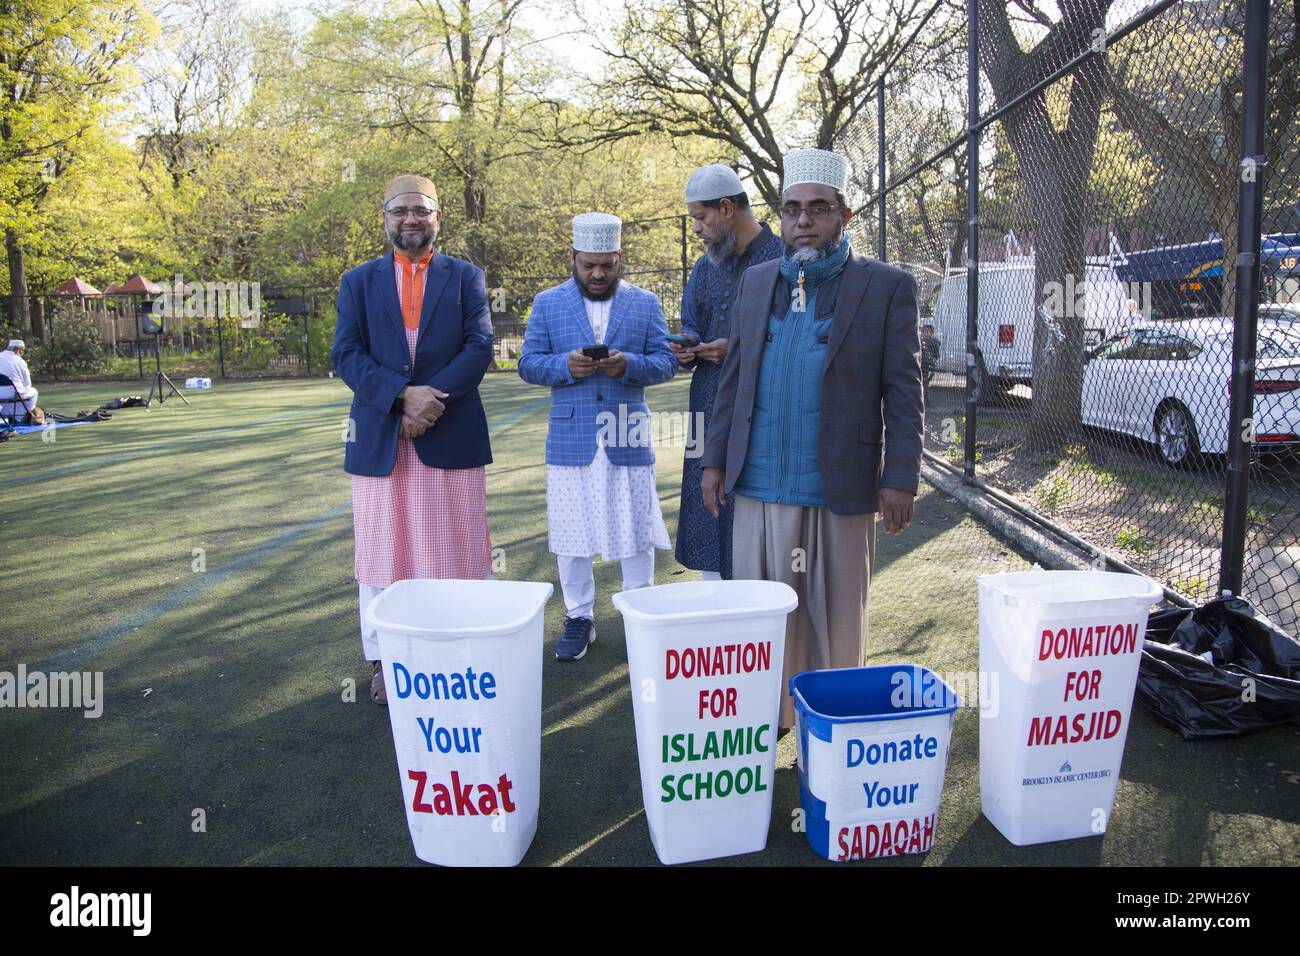 Muslims from various mosques in Brooklyn attend a prayer service on Eid at the end of Ramadan in Prospect Park, Brooklyn, New York.  Zakat is a charity God obligates Muslims to pay yearly on their money and property. Its payment is made to the poor, vulnerable, and deserving as their divinely established right. Stock Photo